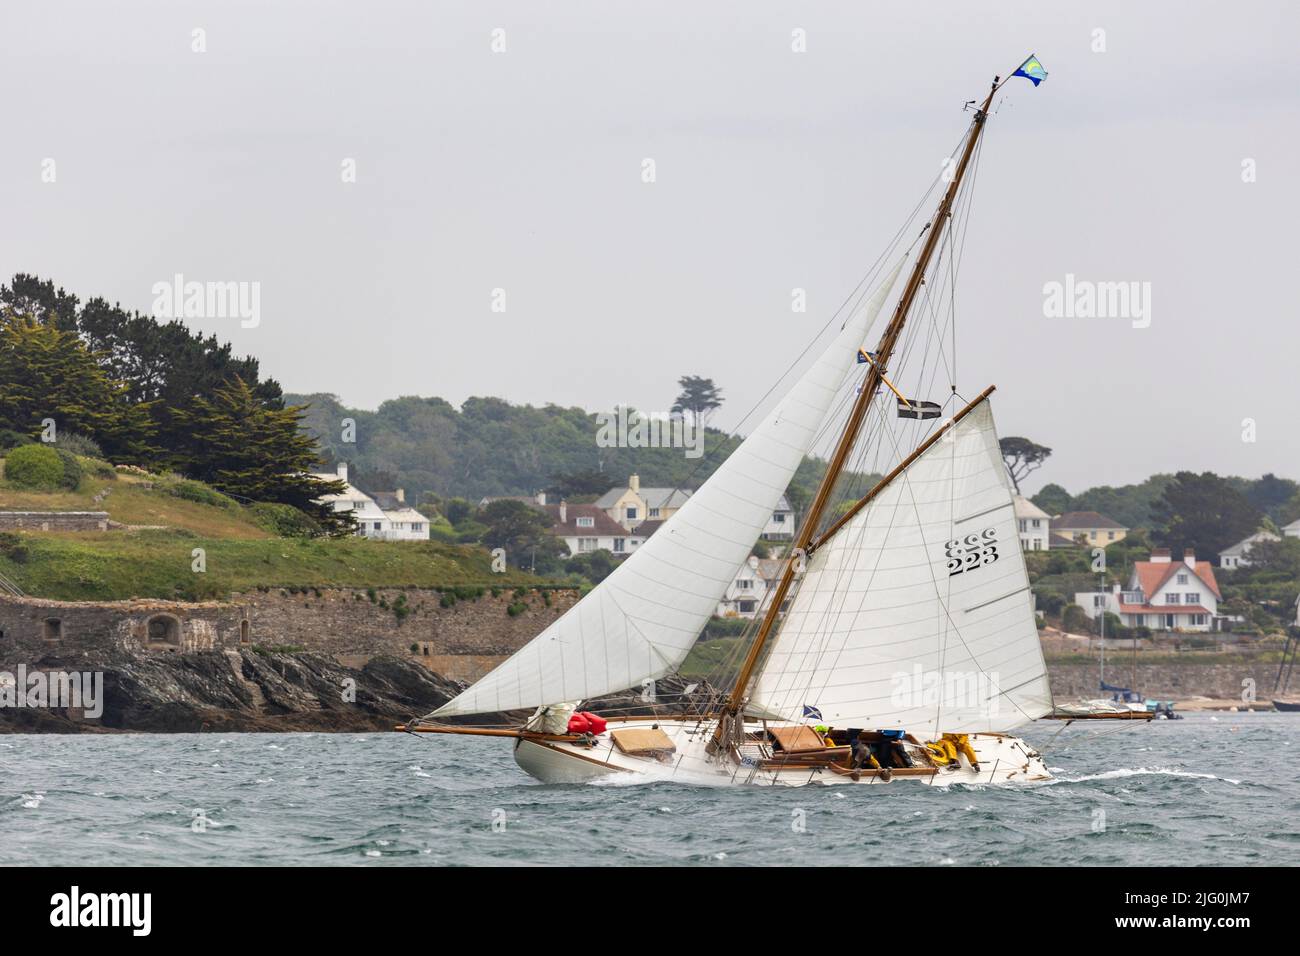 Large Classic wooden vessels, including Bristol Pilot Cutters, race in Carrick Roads in 32knots of wind (half gale) during Falmouth Classics Regatta Stock Photo